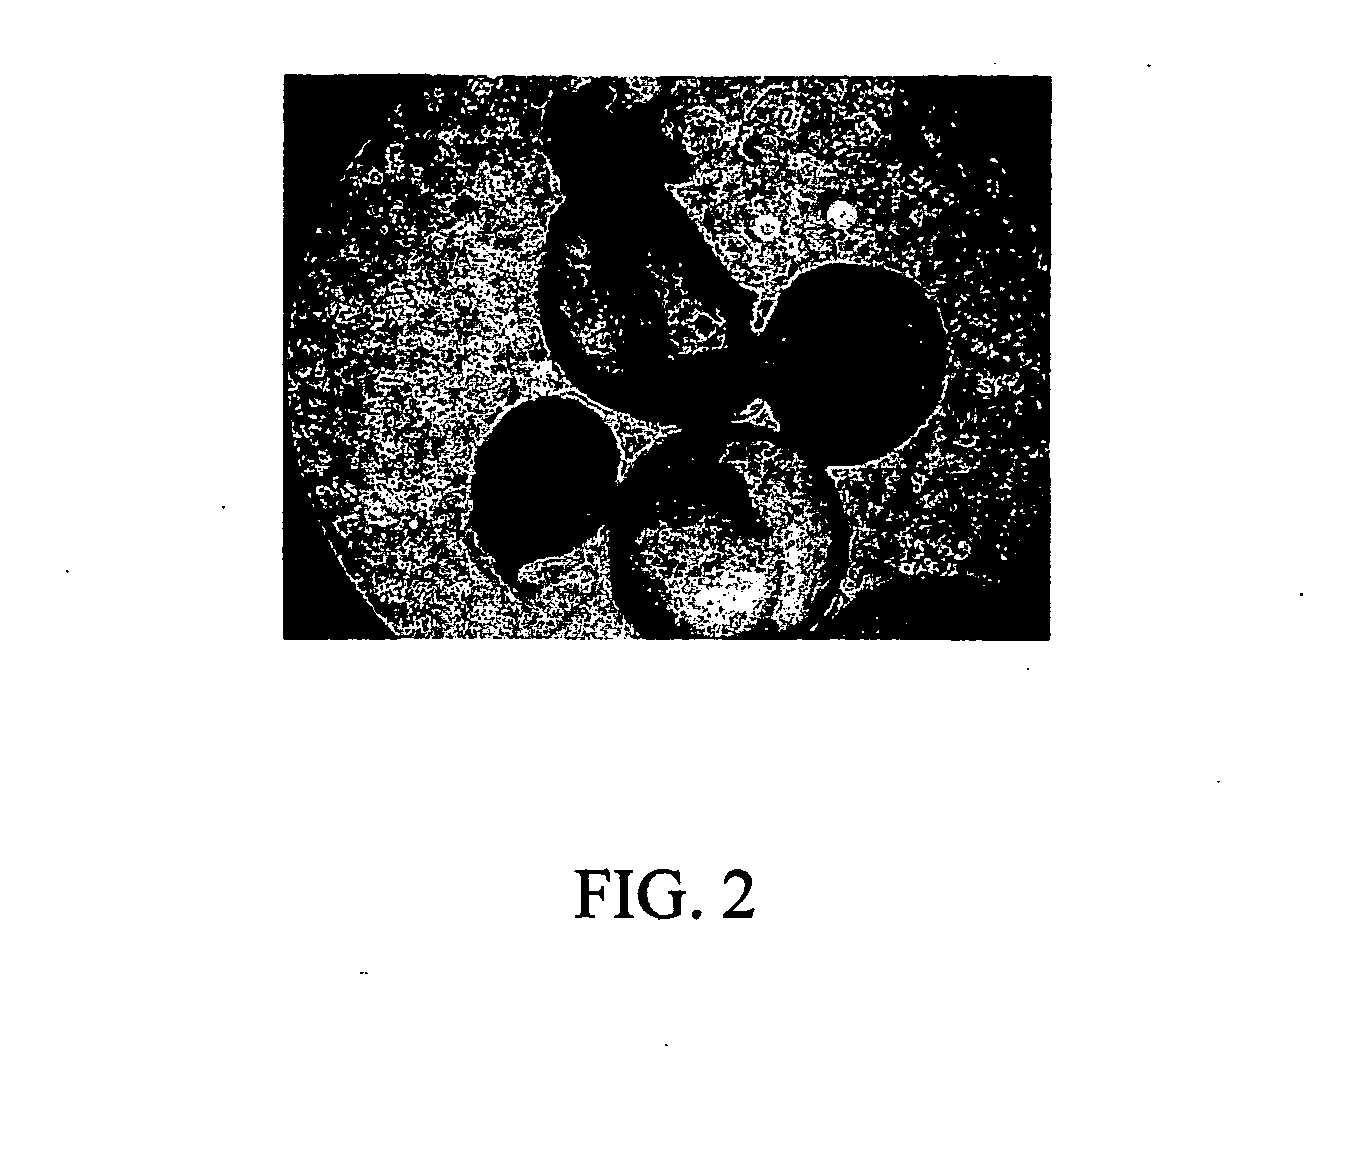 Method of forming multicellular spheroids from the cultured cells